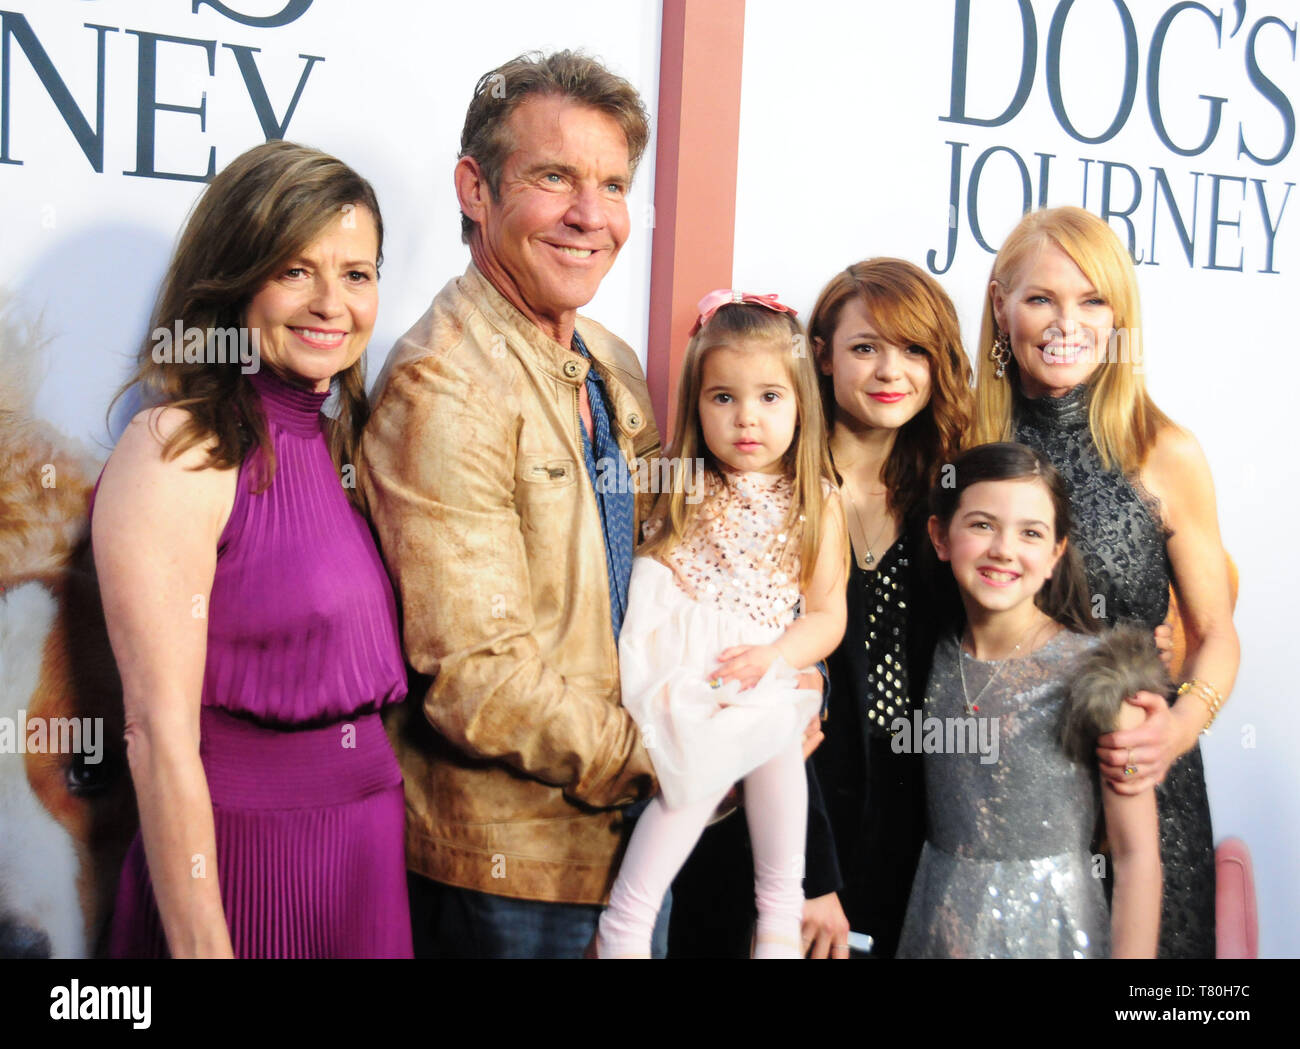 Los Angeles, California, USA 9th May 2019  Director Gail Mancuso, actor Dennis Quaid, actress Emma Volk, actress Kathryn Prescott, actress Abby Ryder Fortson and actress Marg Helgenberger attend Universal Pictures and Amblin Entertainment Present The Premiere of A Dog's Journey on May 9, 2019 at Arclight Hollywood in Los Angeles, California, USA. Photo by Barry King/Alamy Live News Stock Photo